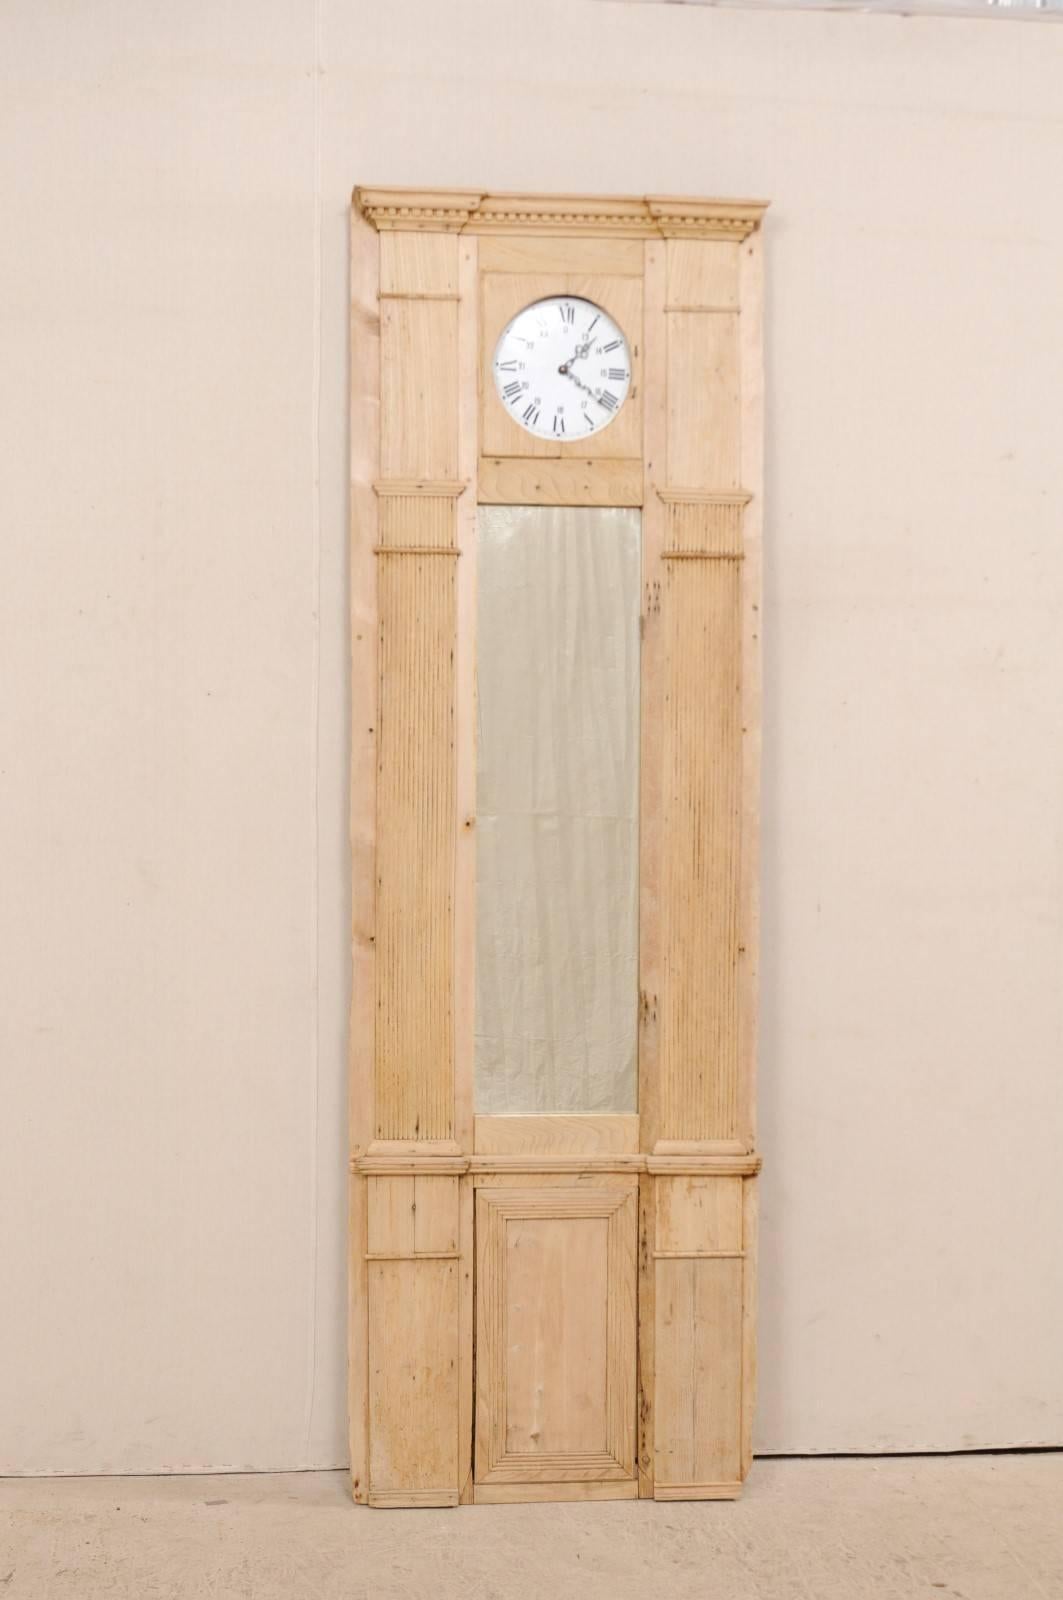 A French 19th century architectural wood panel with clock face. This antique French natural wood panel features a slightly projected cornice with dentil molding atop a clock face, inset into a panel. There is a vertical, rectangular-shaped mirror at